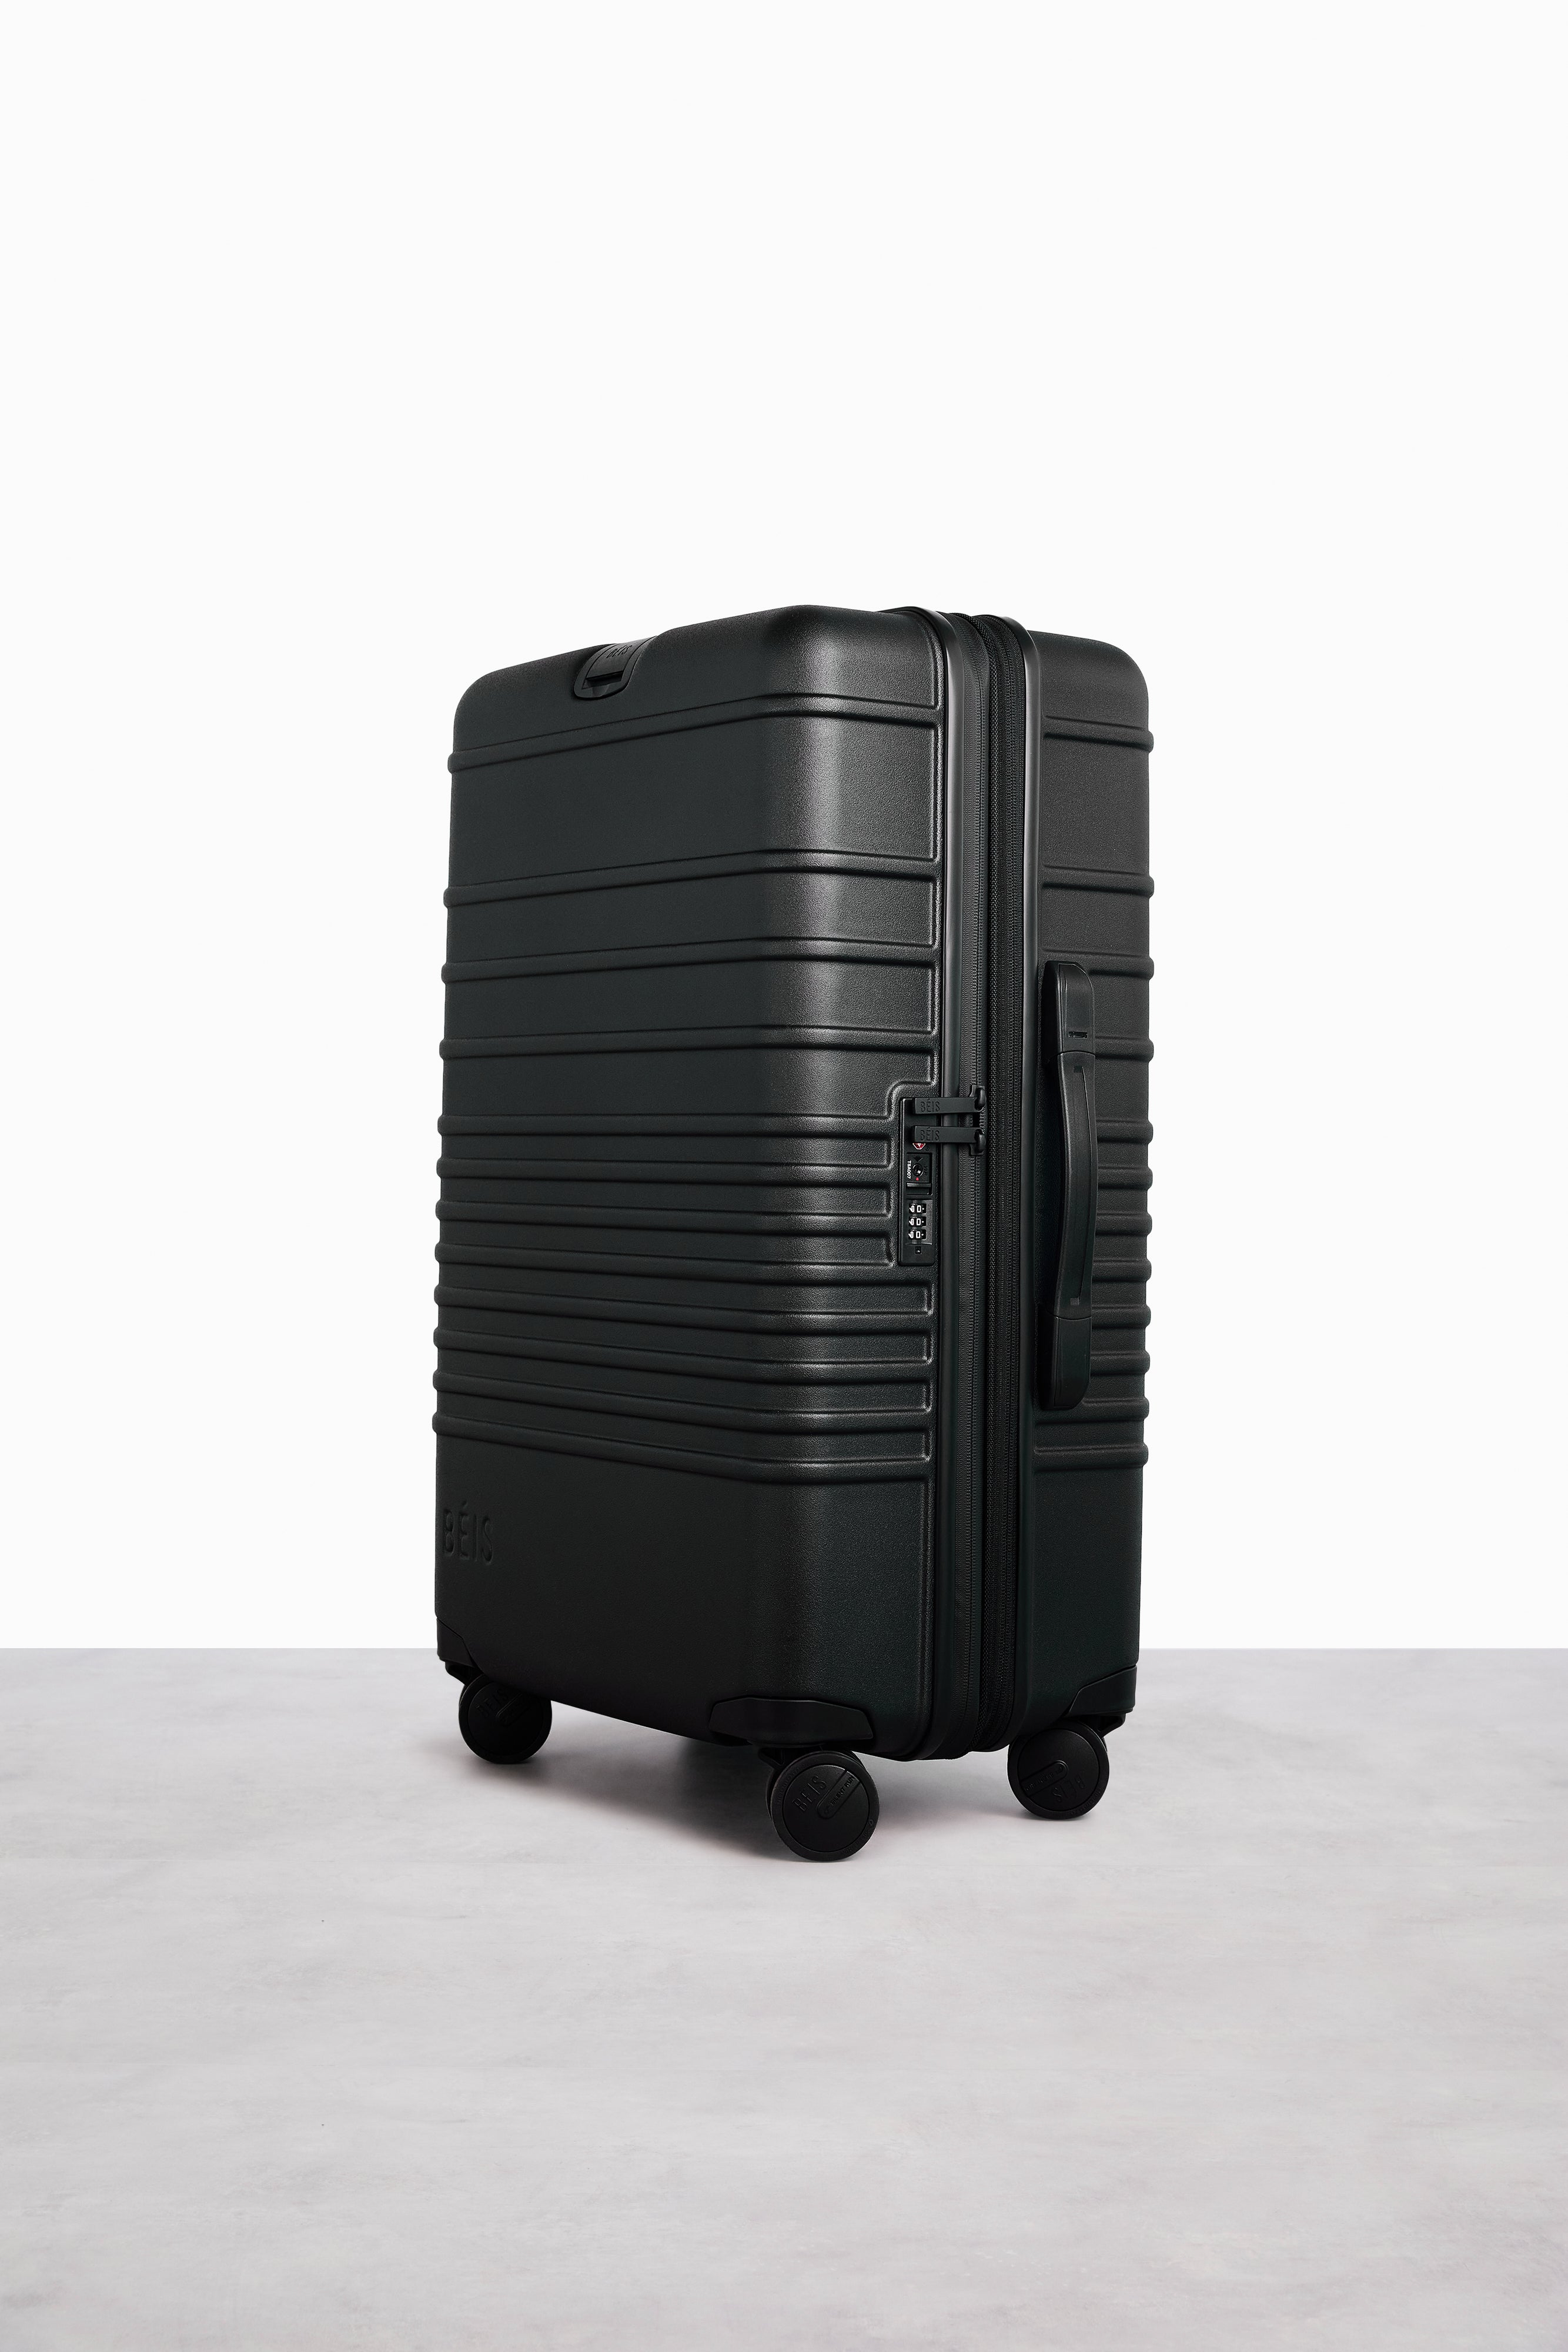 13 Best Hardside Luggage of 2023, Tested and Reviewed